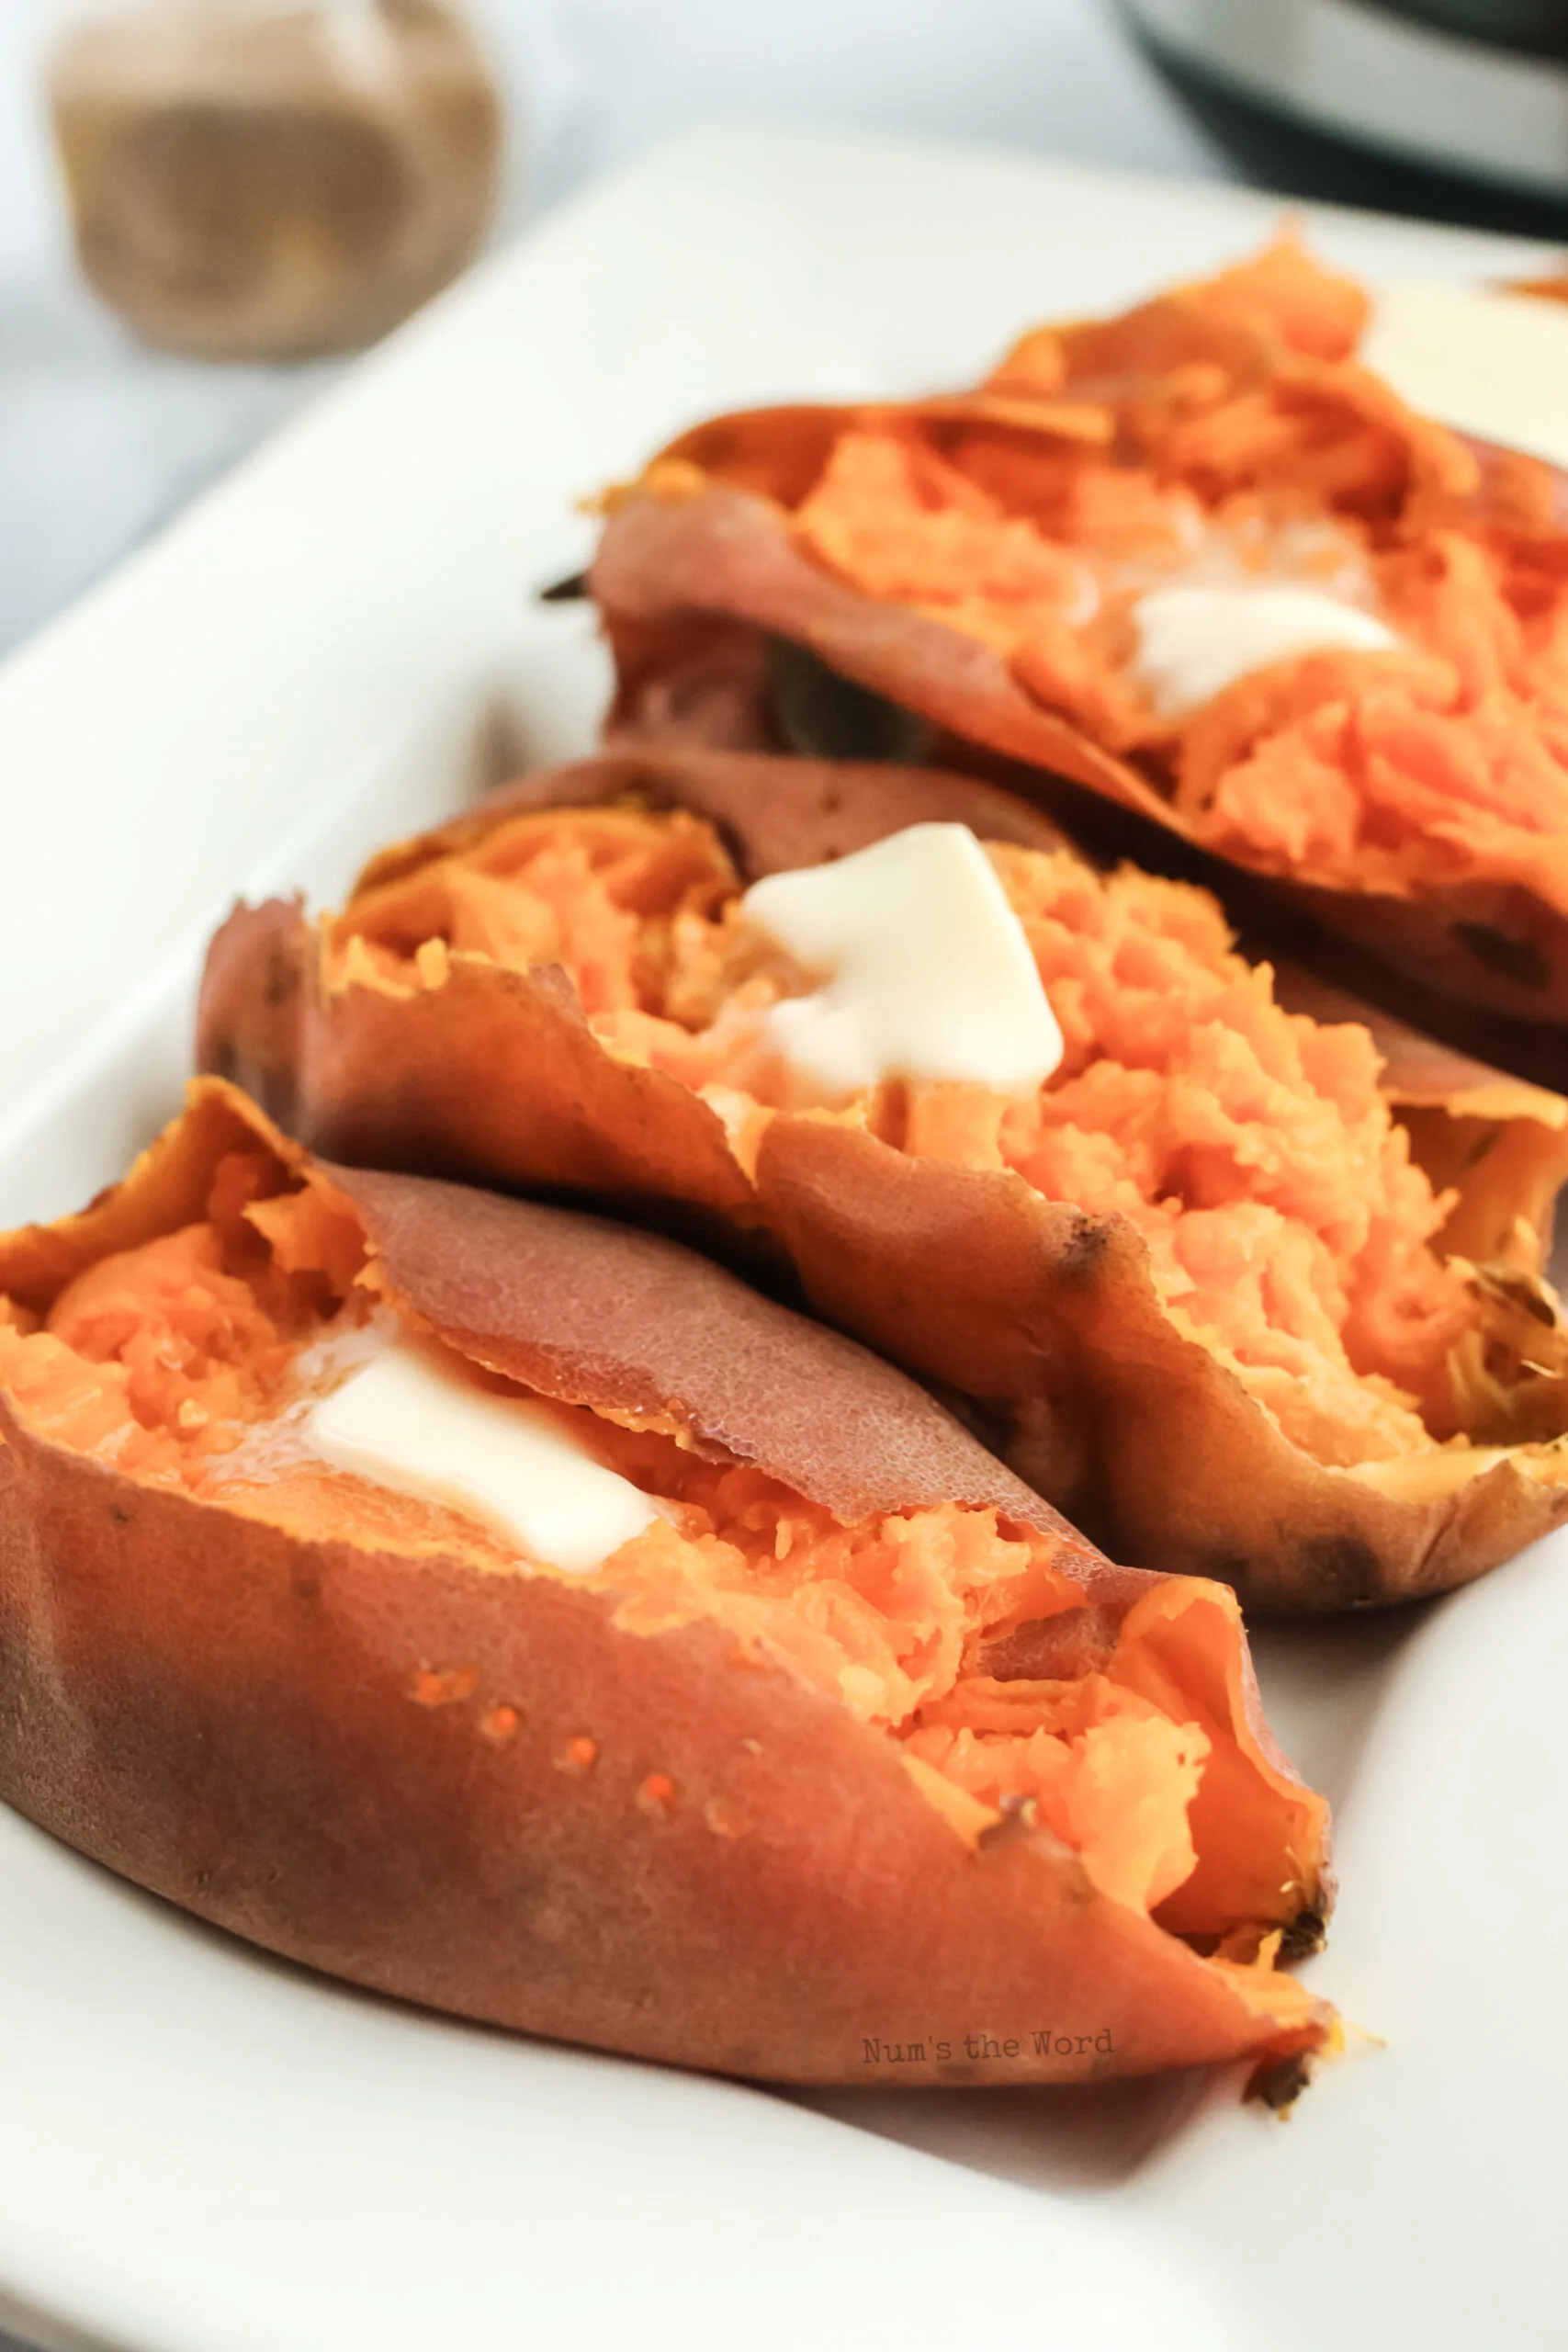 3 sweet potatoes with butter dolloped on top, side view angle